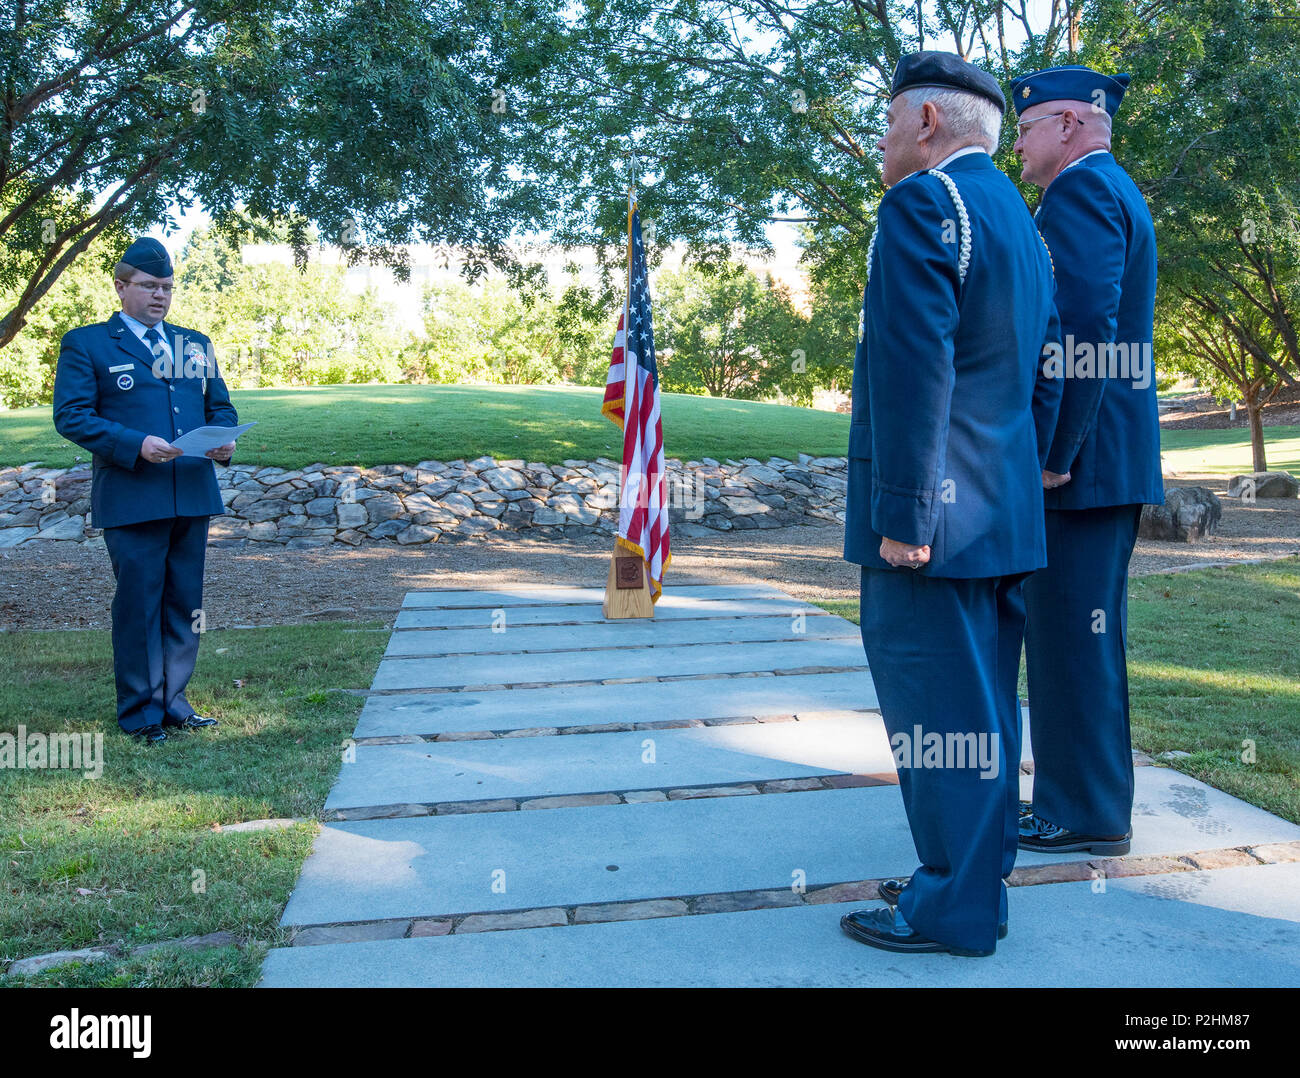 U.S. Air Force Maj. Brock Lusk reads the orders during the promotion ceremony of Lt. Col. Michael E. Mac Lain (far right) during a ceremony at the Scroll of Honor in Clemson University’s Memorial Park, Sept. 30, 2016. Mac Lain is the Aeromedical Operations Flight Commander for the 43rd  Aeromedical Evacuation Squadron, Pope Army Airfield, Fort Bragg, NC. He directs daily flight operations for 60 assigned personnel, and provides medical care as a Flight Nurse on aeromedical evacuation missions. Mac Lain has deployed nine times to combat zones and successfully aero medically evacuated over 700 o Stock Photo